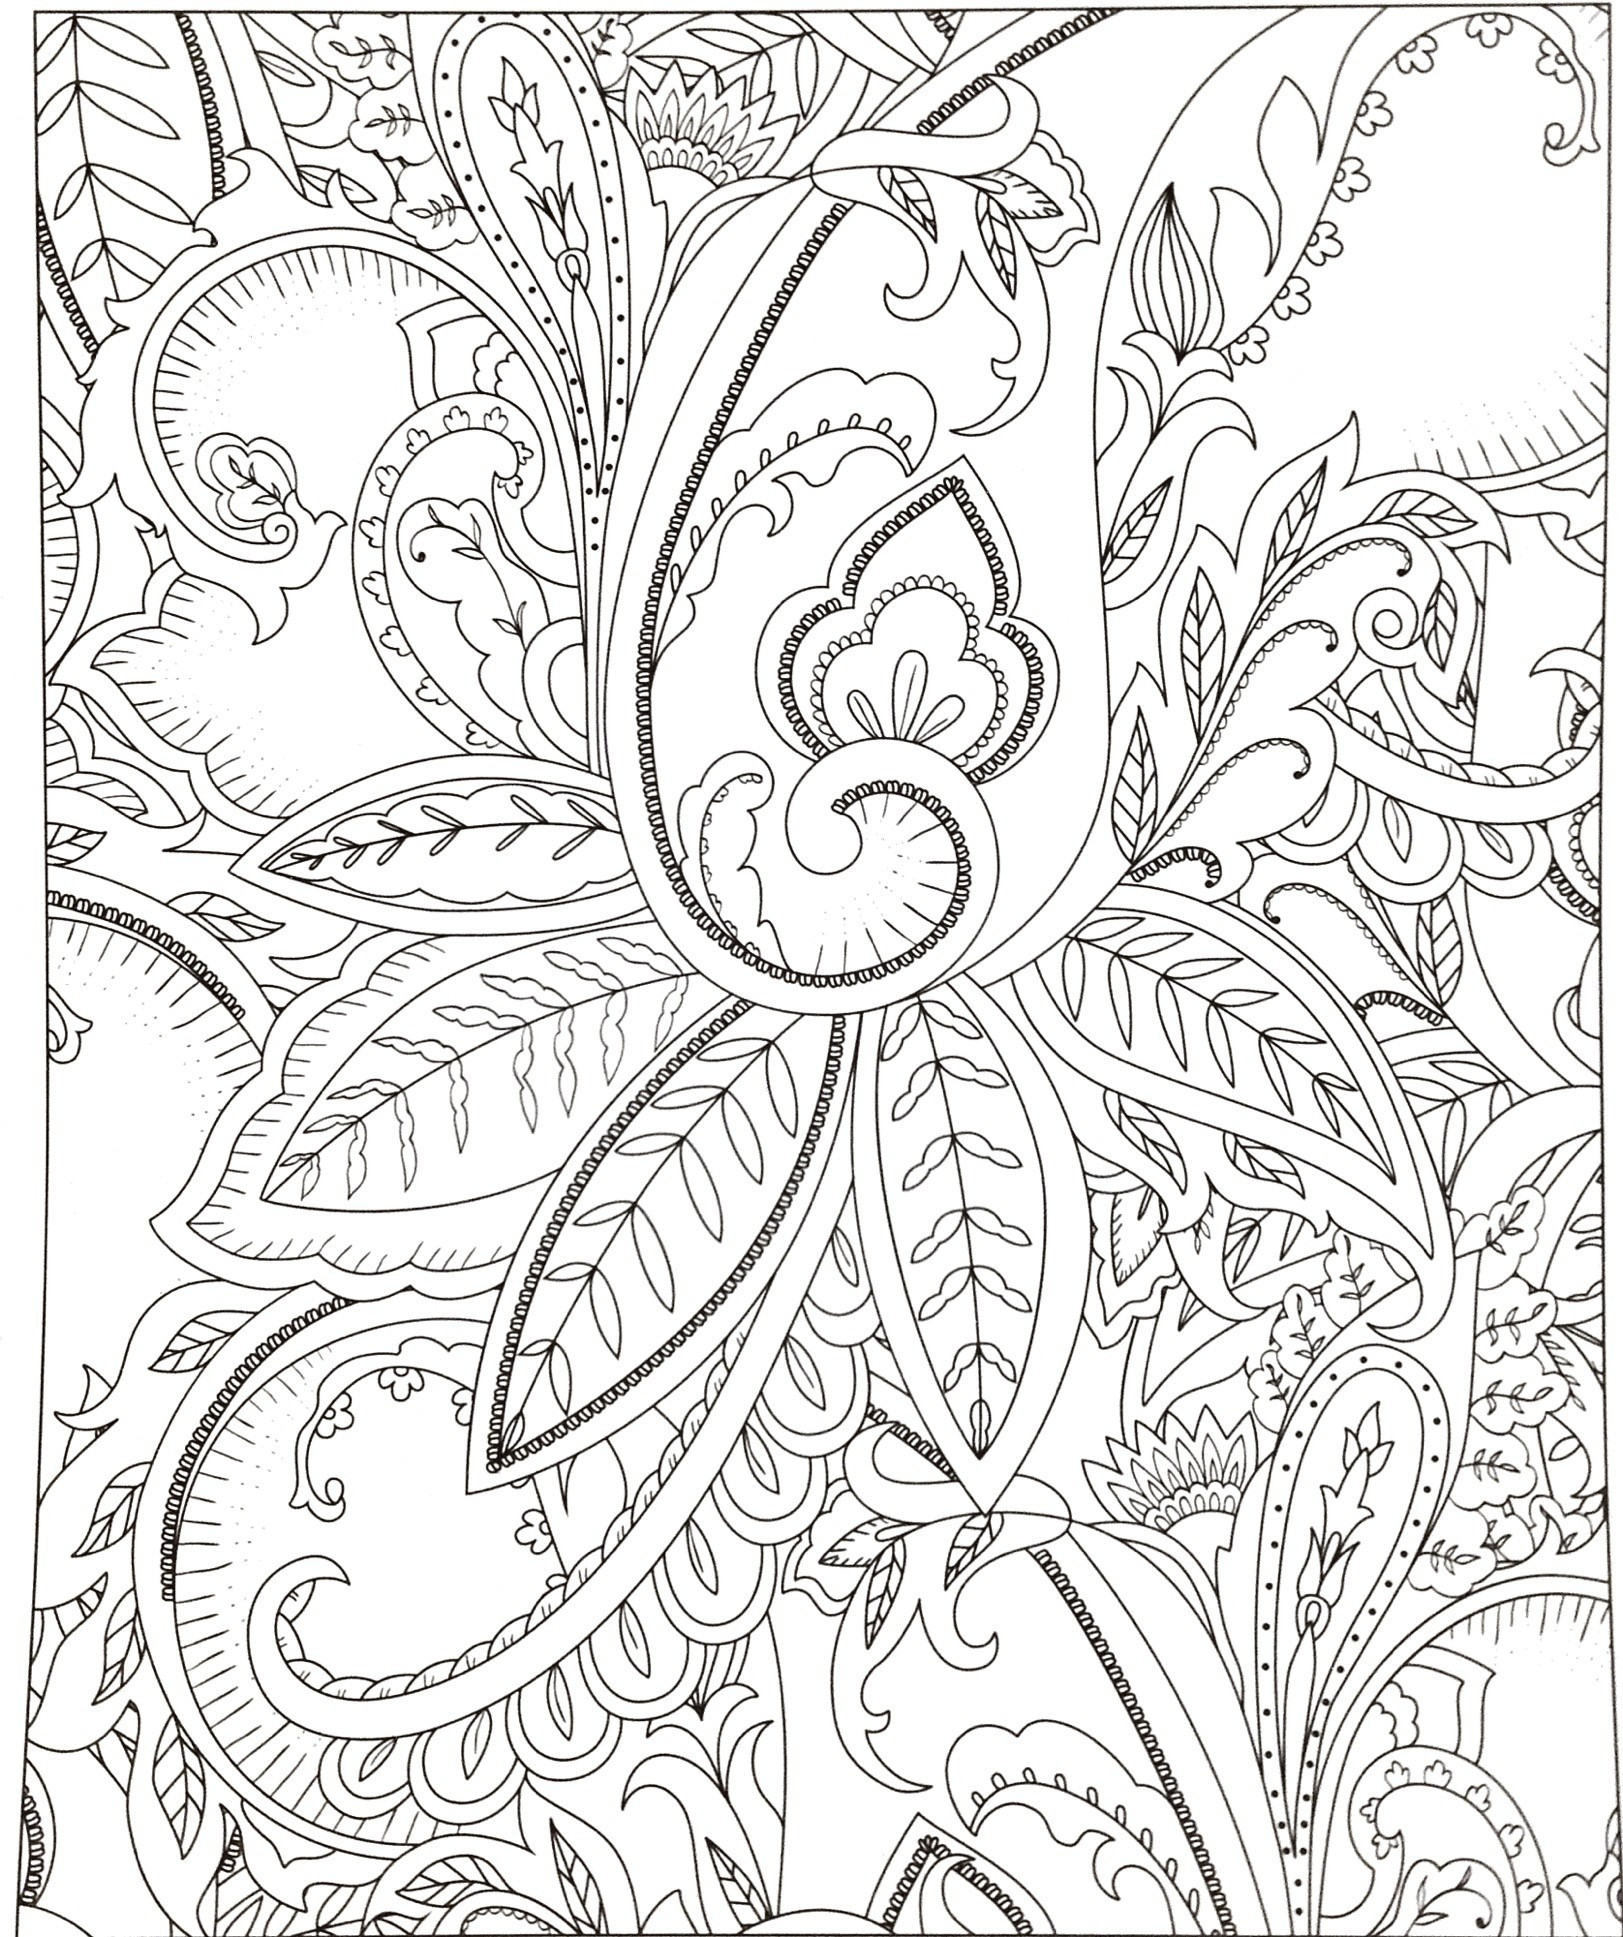 Colorama Coloring Book For Kids
 Colorama Coloring Pages